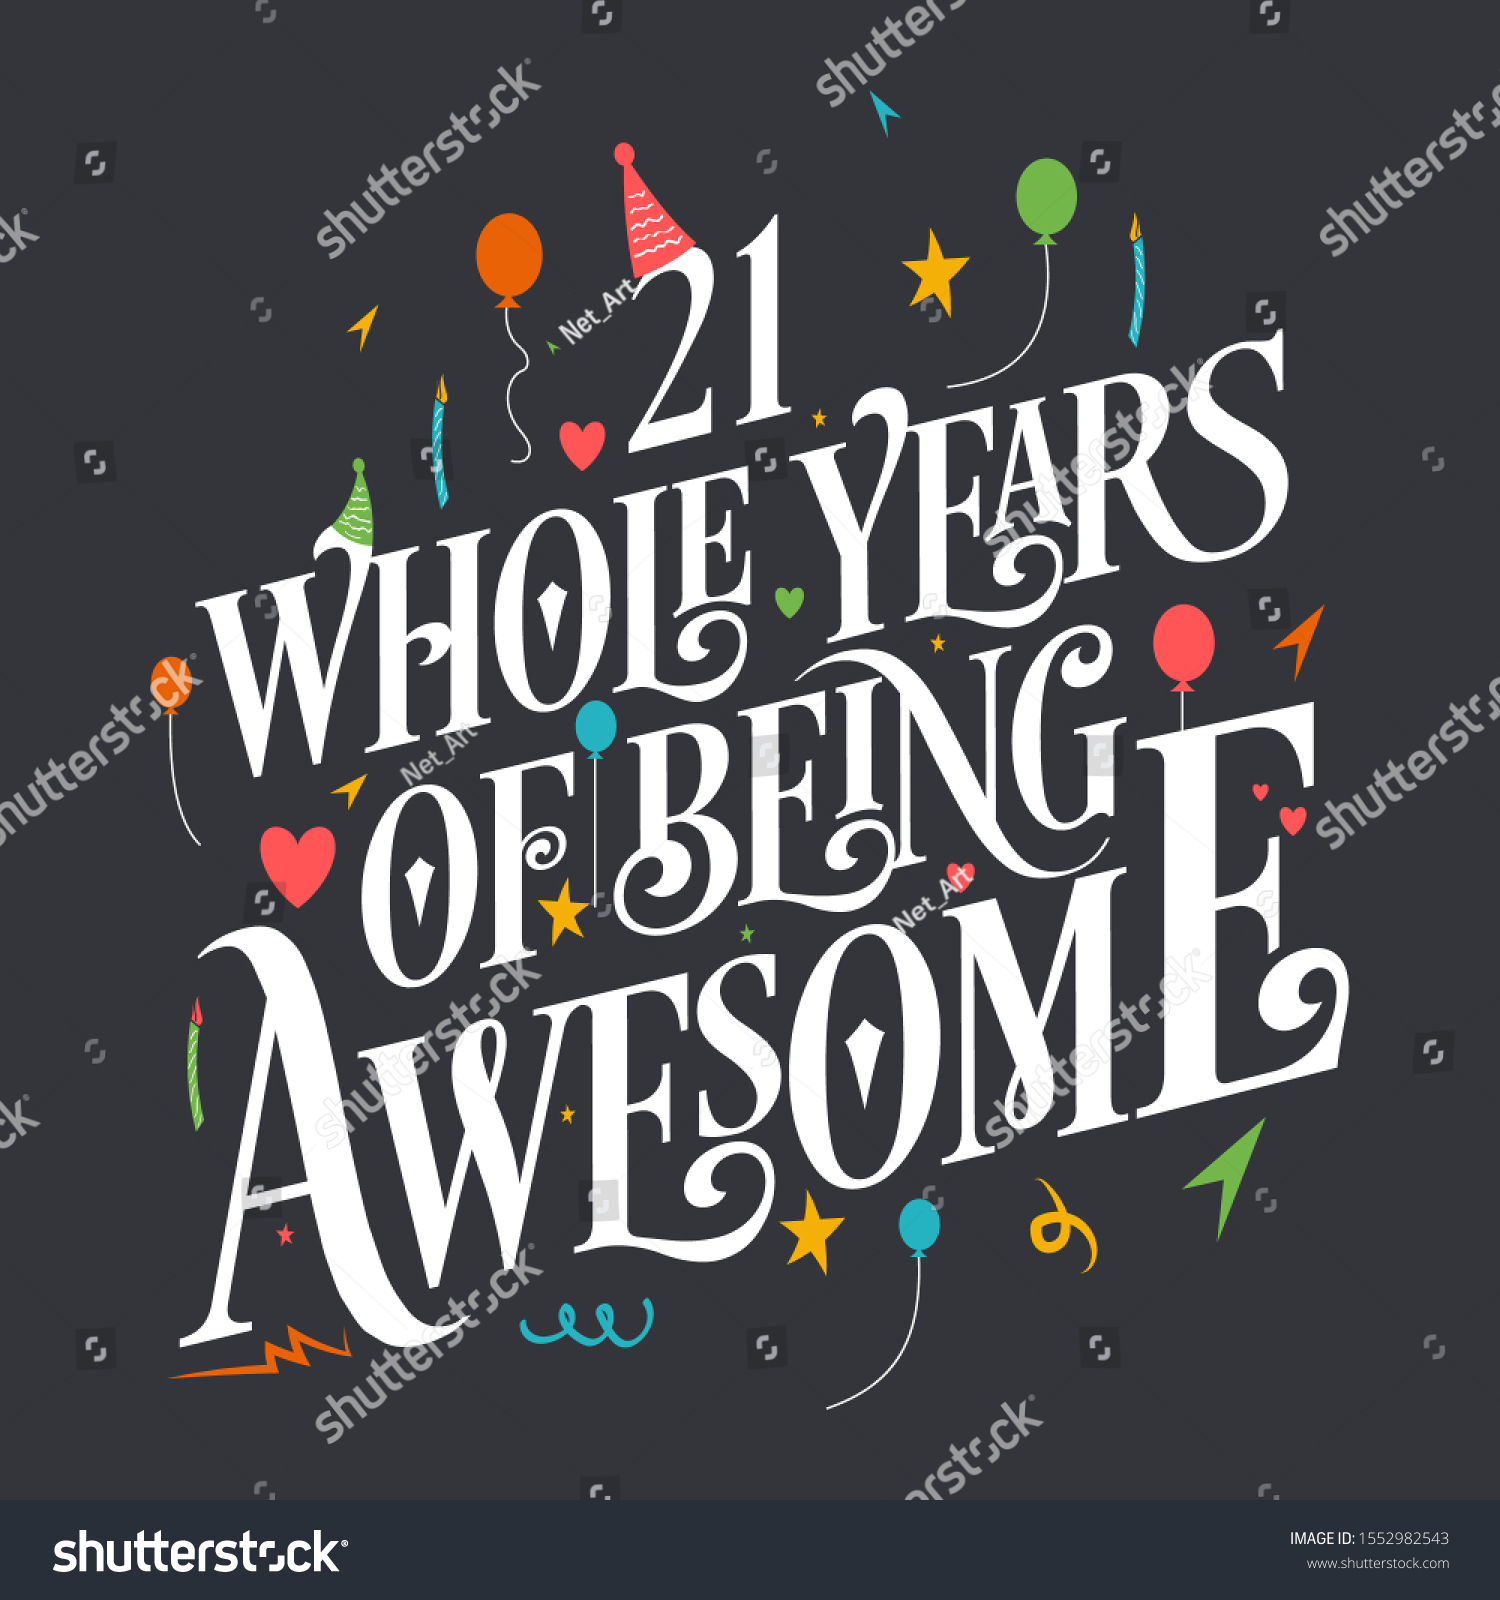 SVG of 21st Birthday And 21st Anniversary Typography Design - 21 Whole Years Of Being Awesome svg